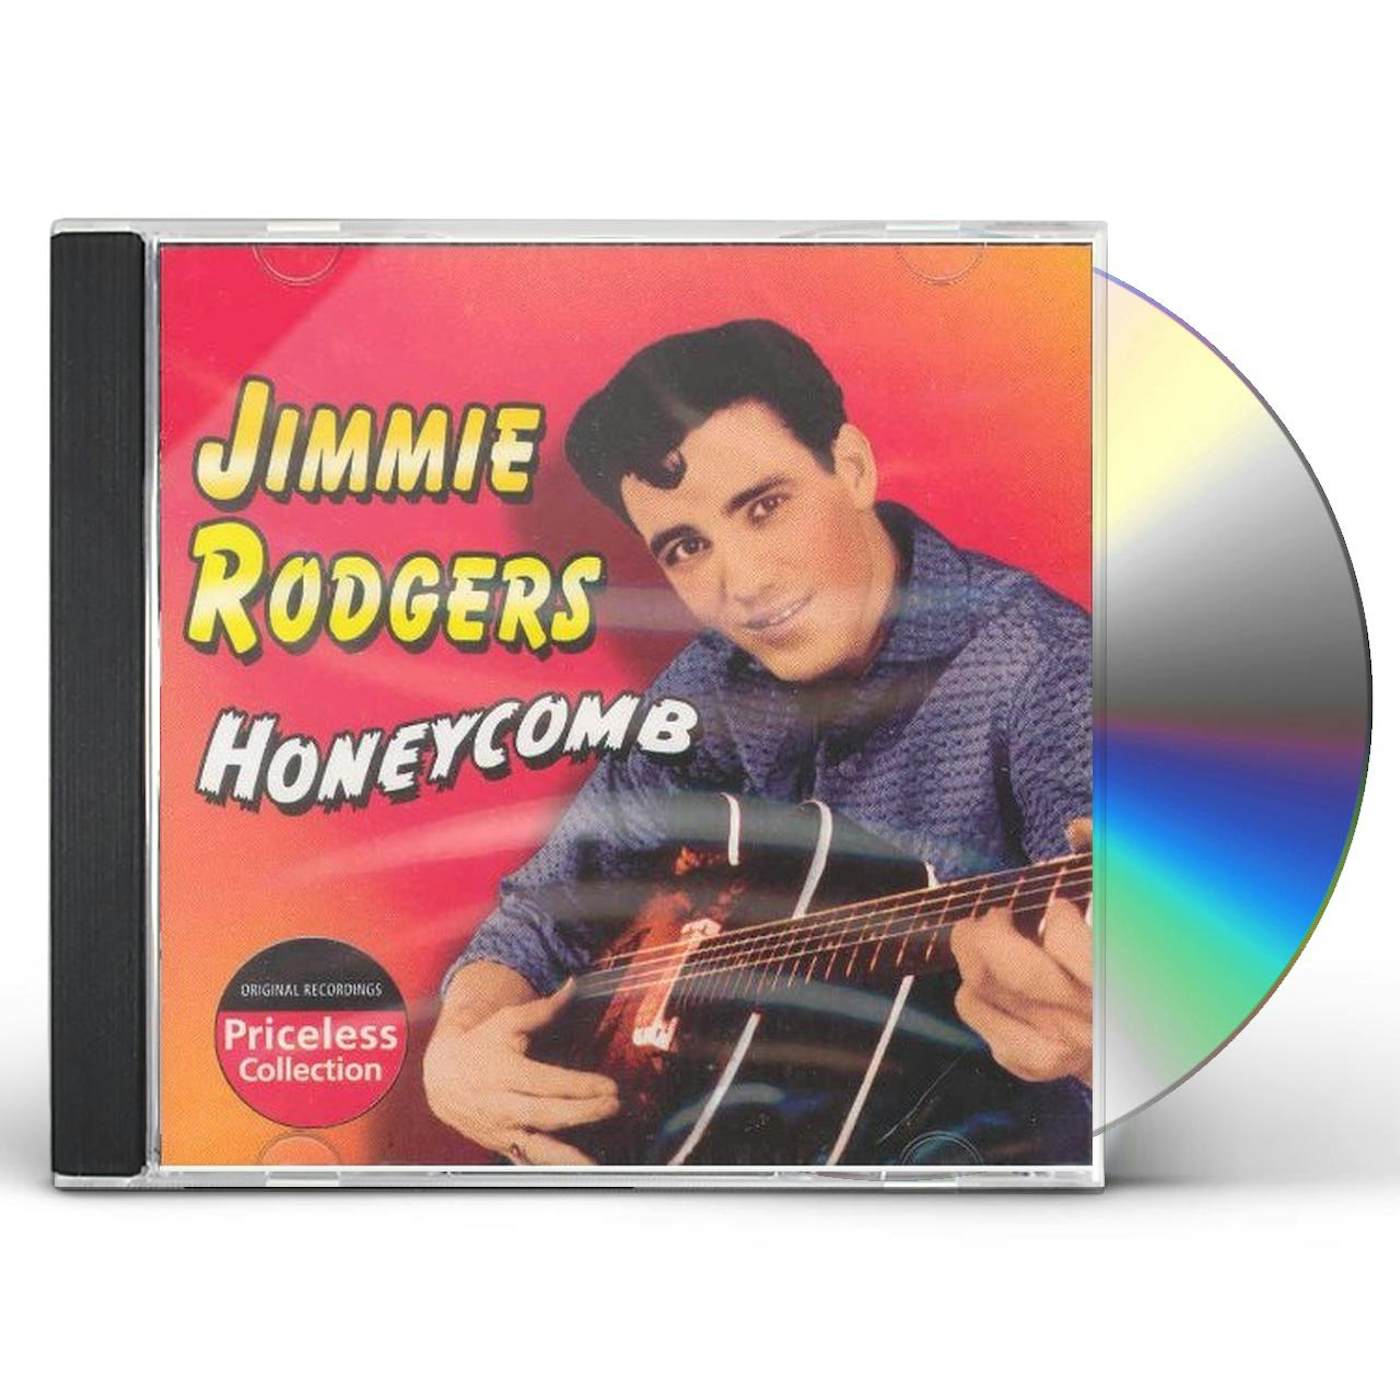 Jimmie Rodgers HONEYCOMB CD